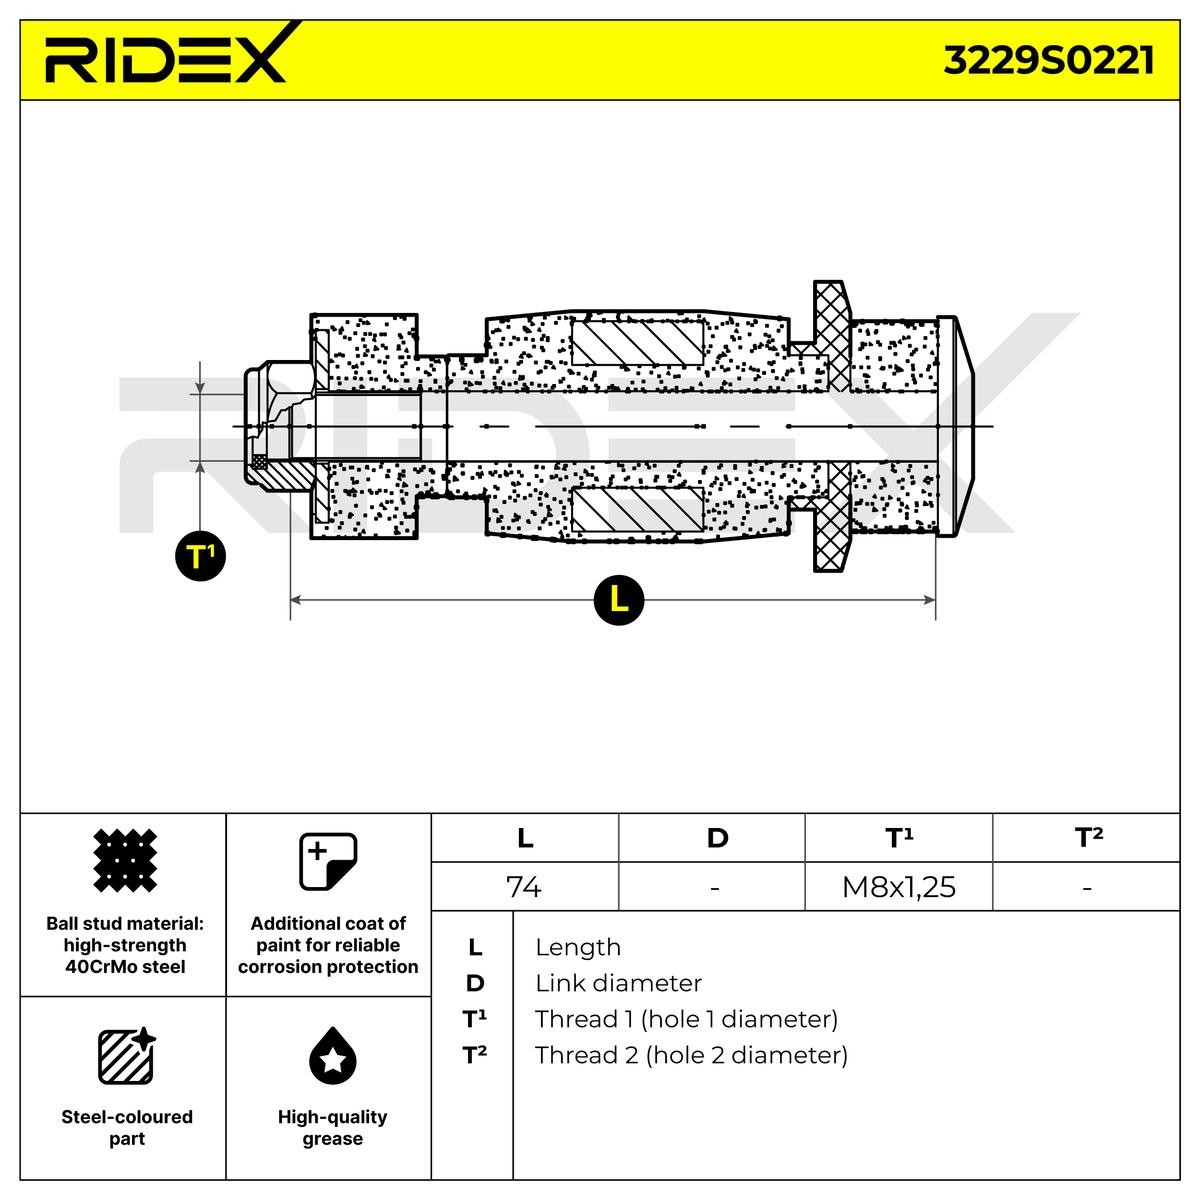 3229S0221 Anti-roll bar linkage 3229S0221 RIDEX Front axle both sides, 78mm, MM8x1.25R, Elastomer